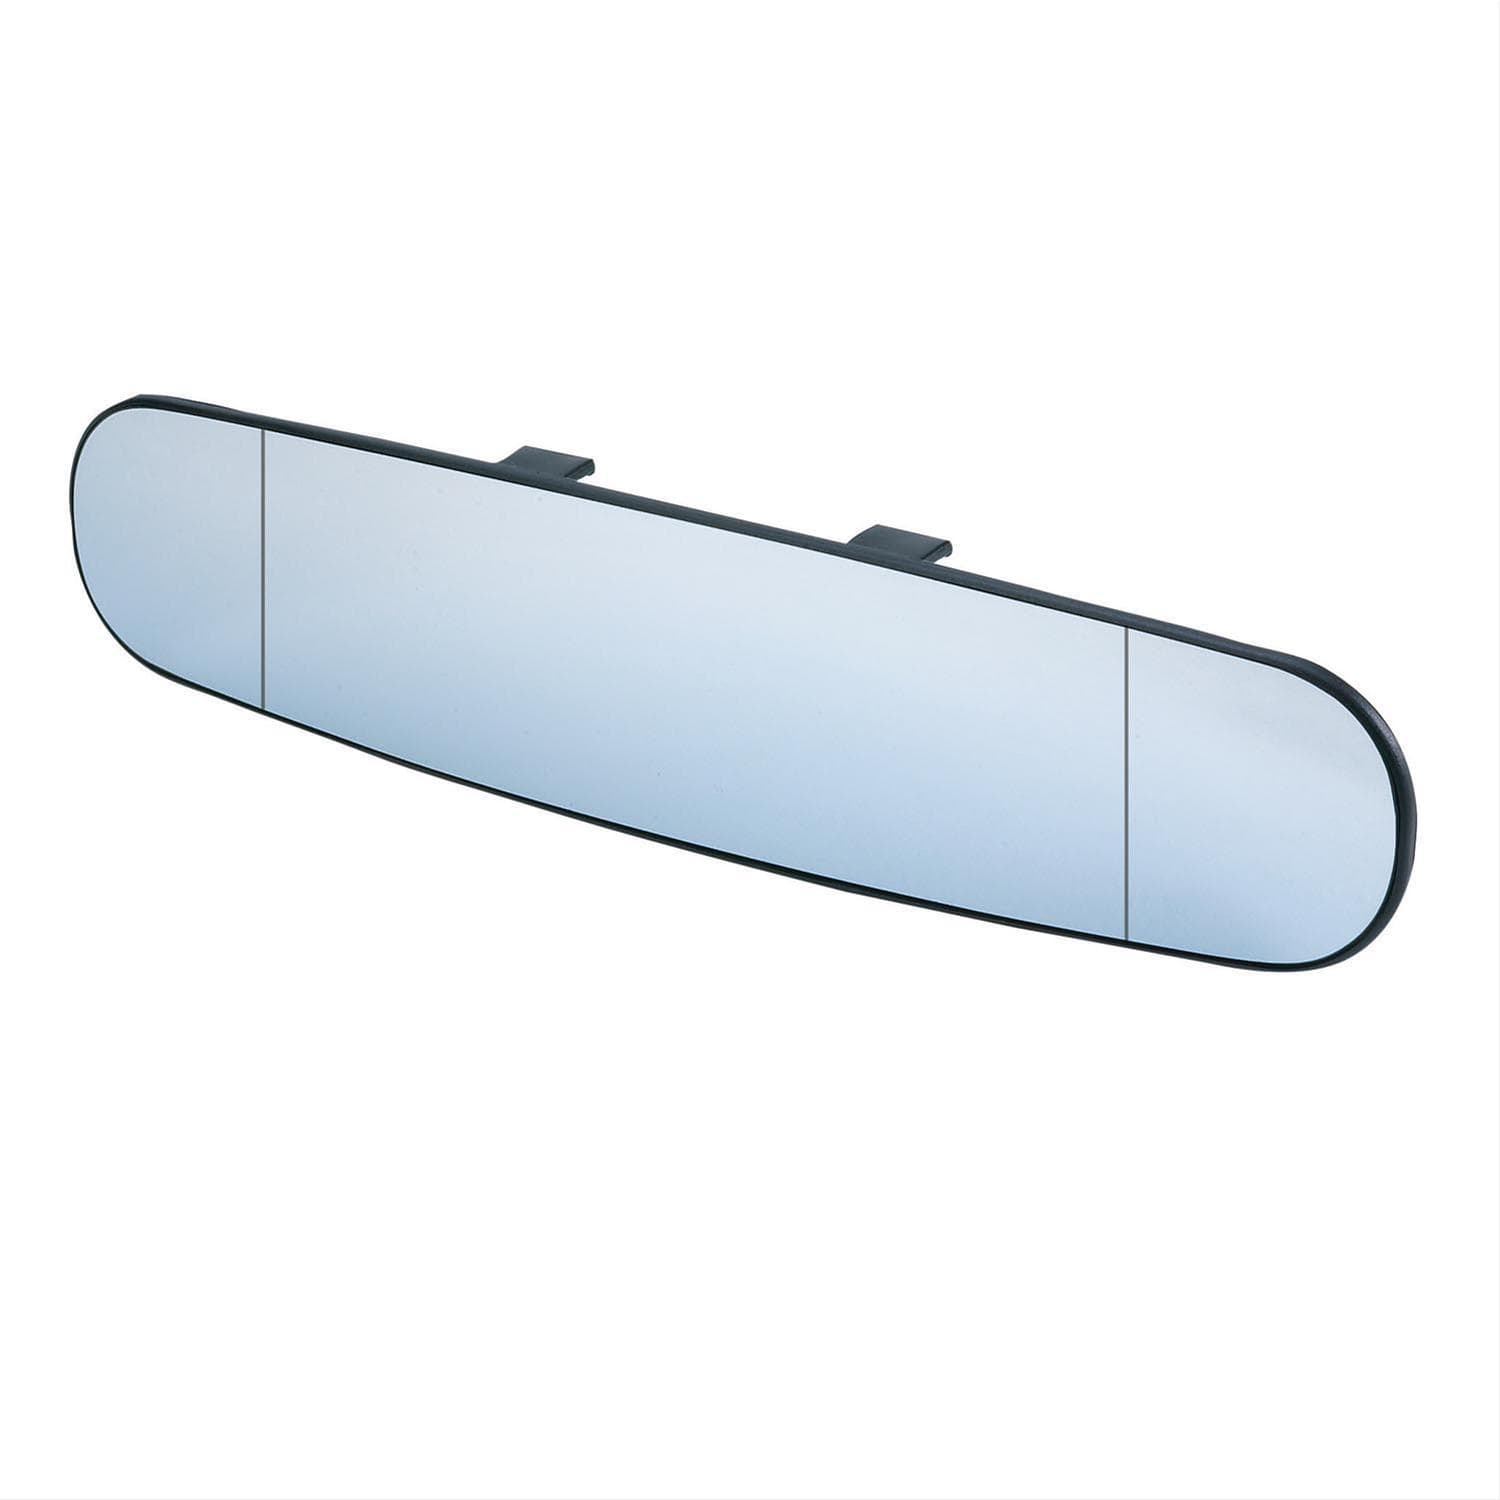 K Source RM1100 Extended Rear View Mirror 11-1/2"